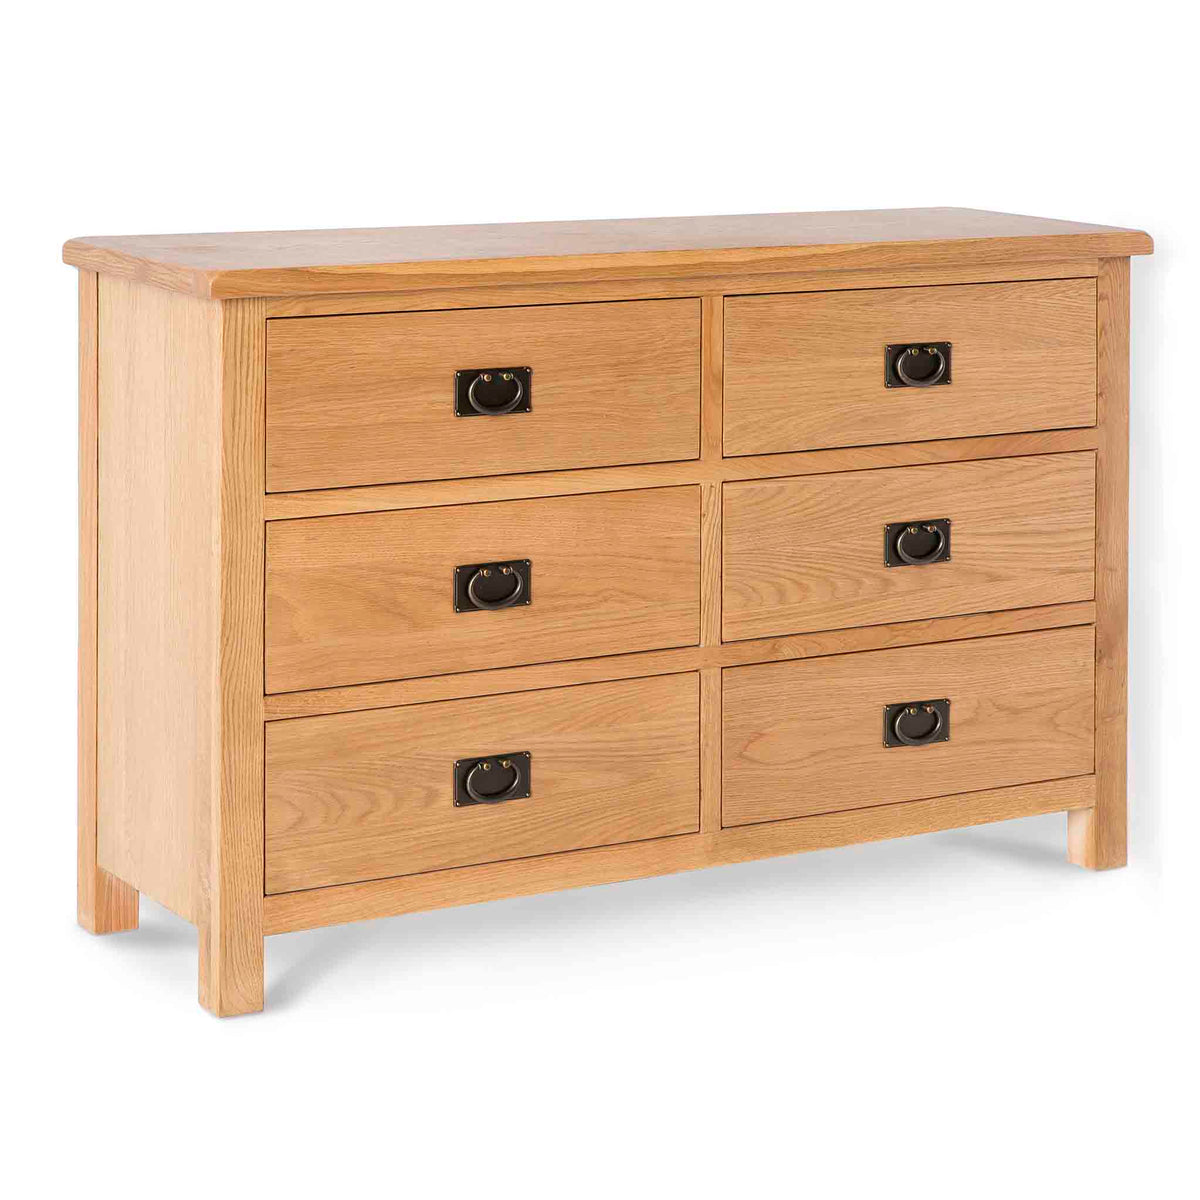 Surrey Oak Large Chest Of Drawers - Side view